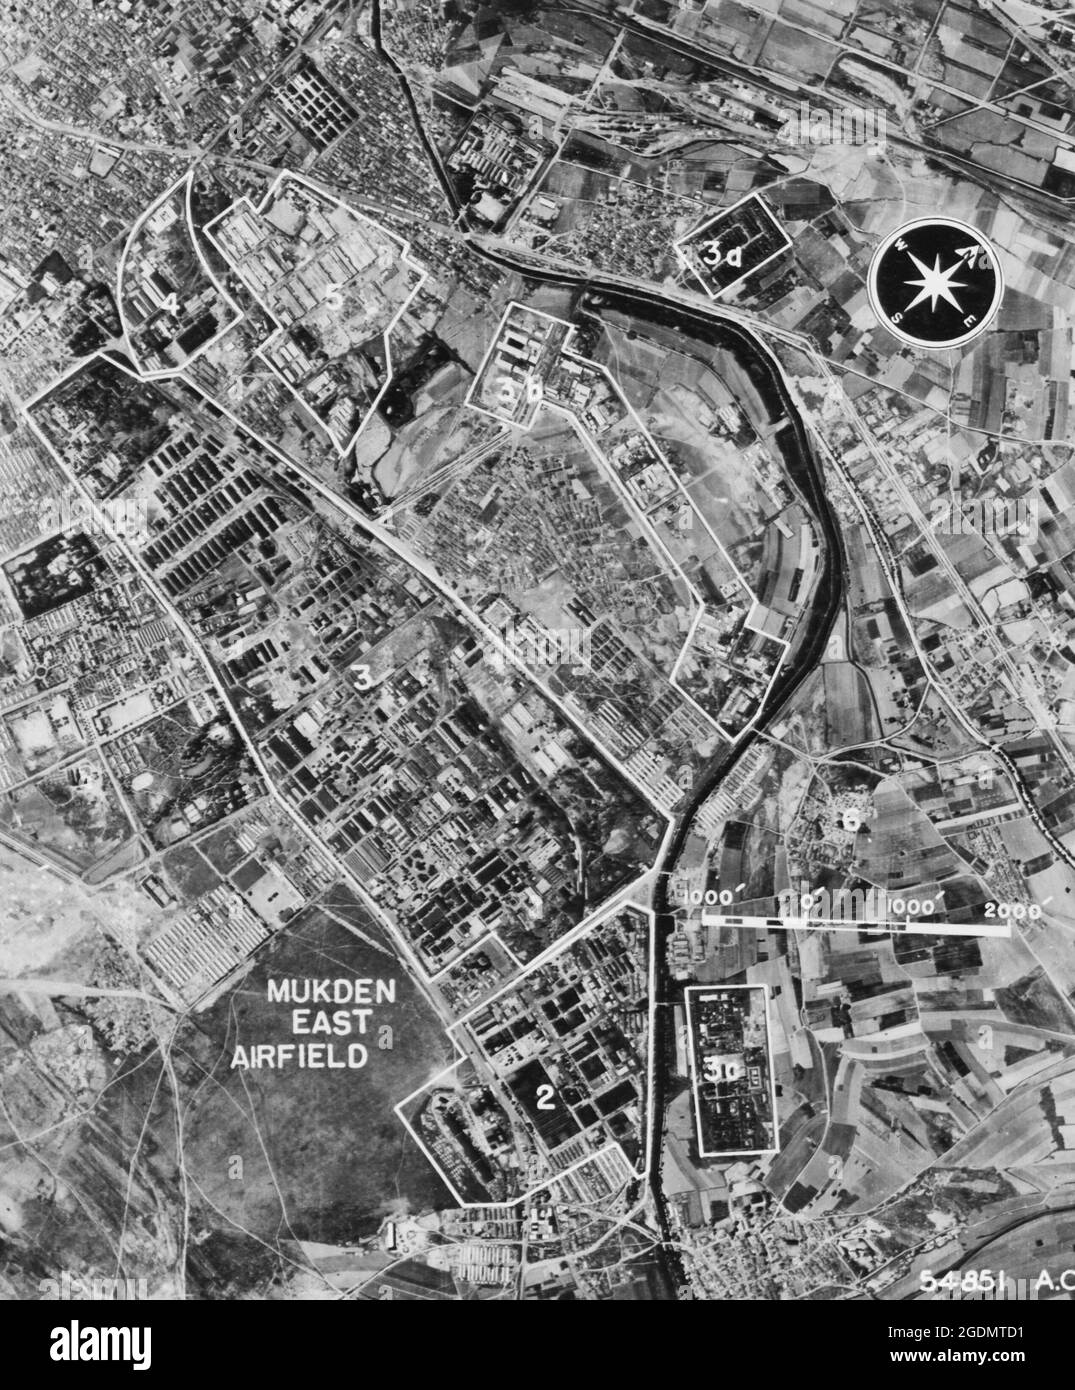 East Mukden, Manchuria-(Photo taken on 14 June 44.) This area is near North Mukden airfield. Key: (1) AA battery, (2) Manchuria Airplane Mfg. Co.--A/C assembly, (3) Mukden arsenal, (3a and 3c) explosive storage and probable shell loading - World War II Stock Photo